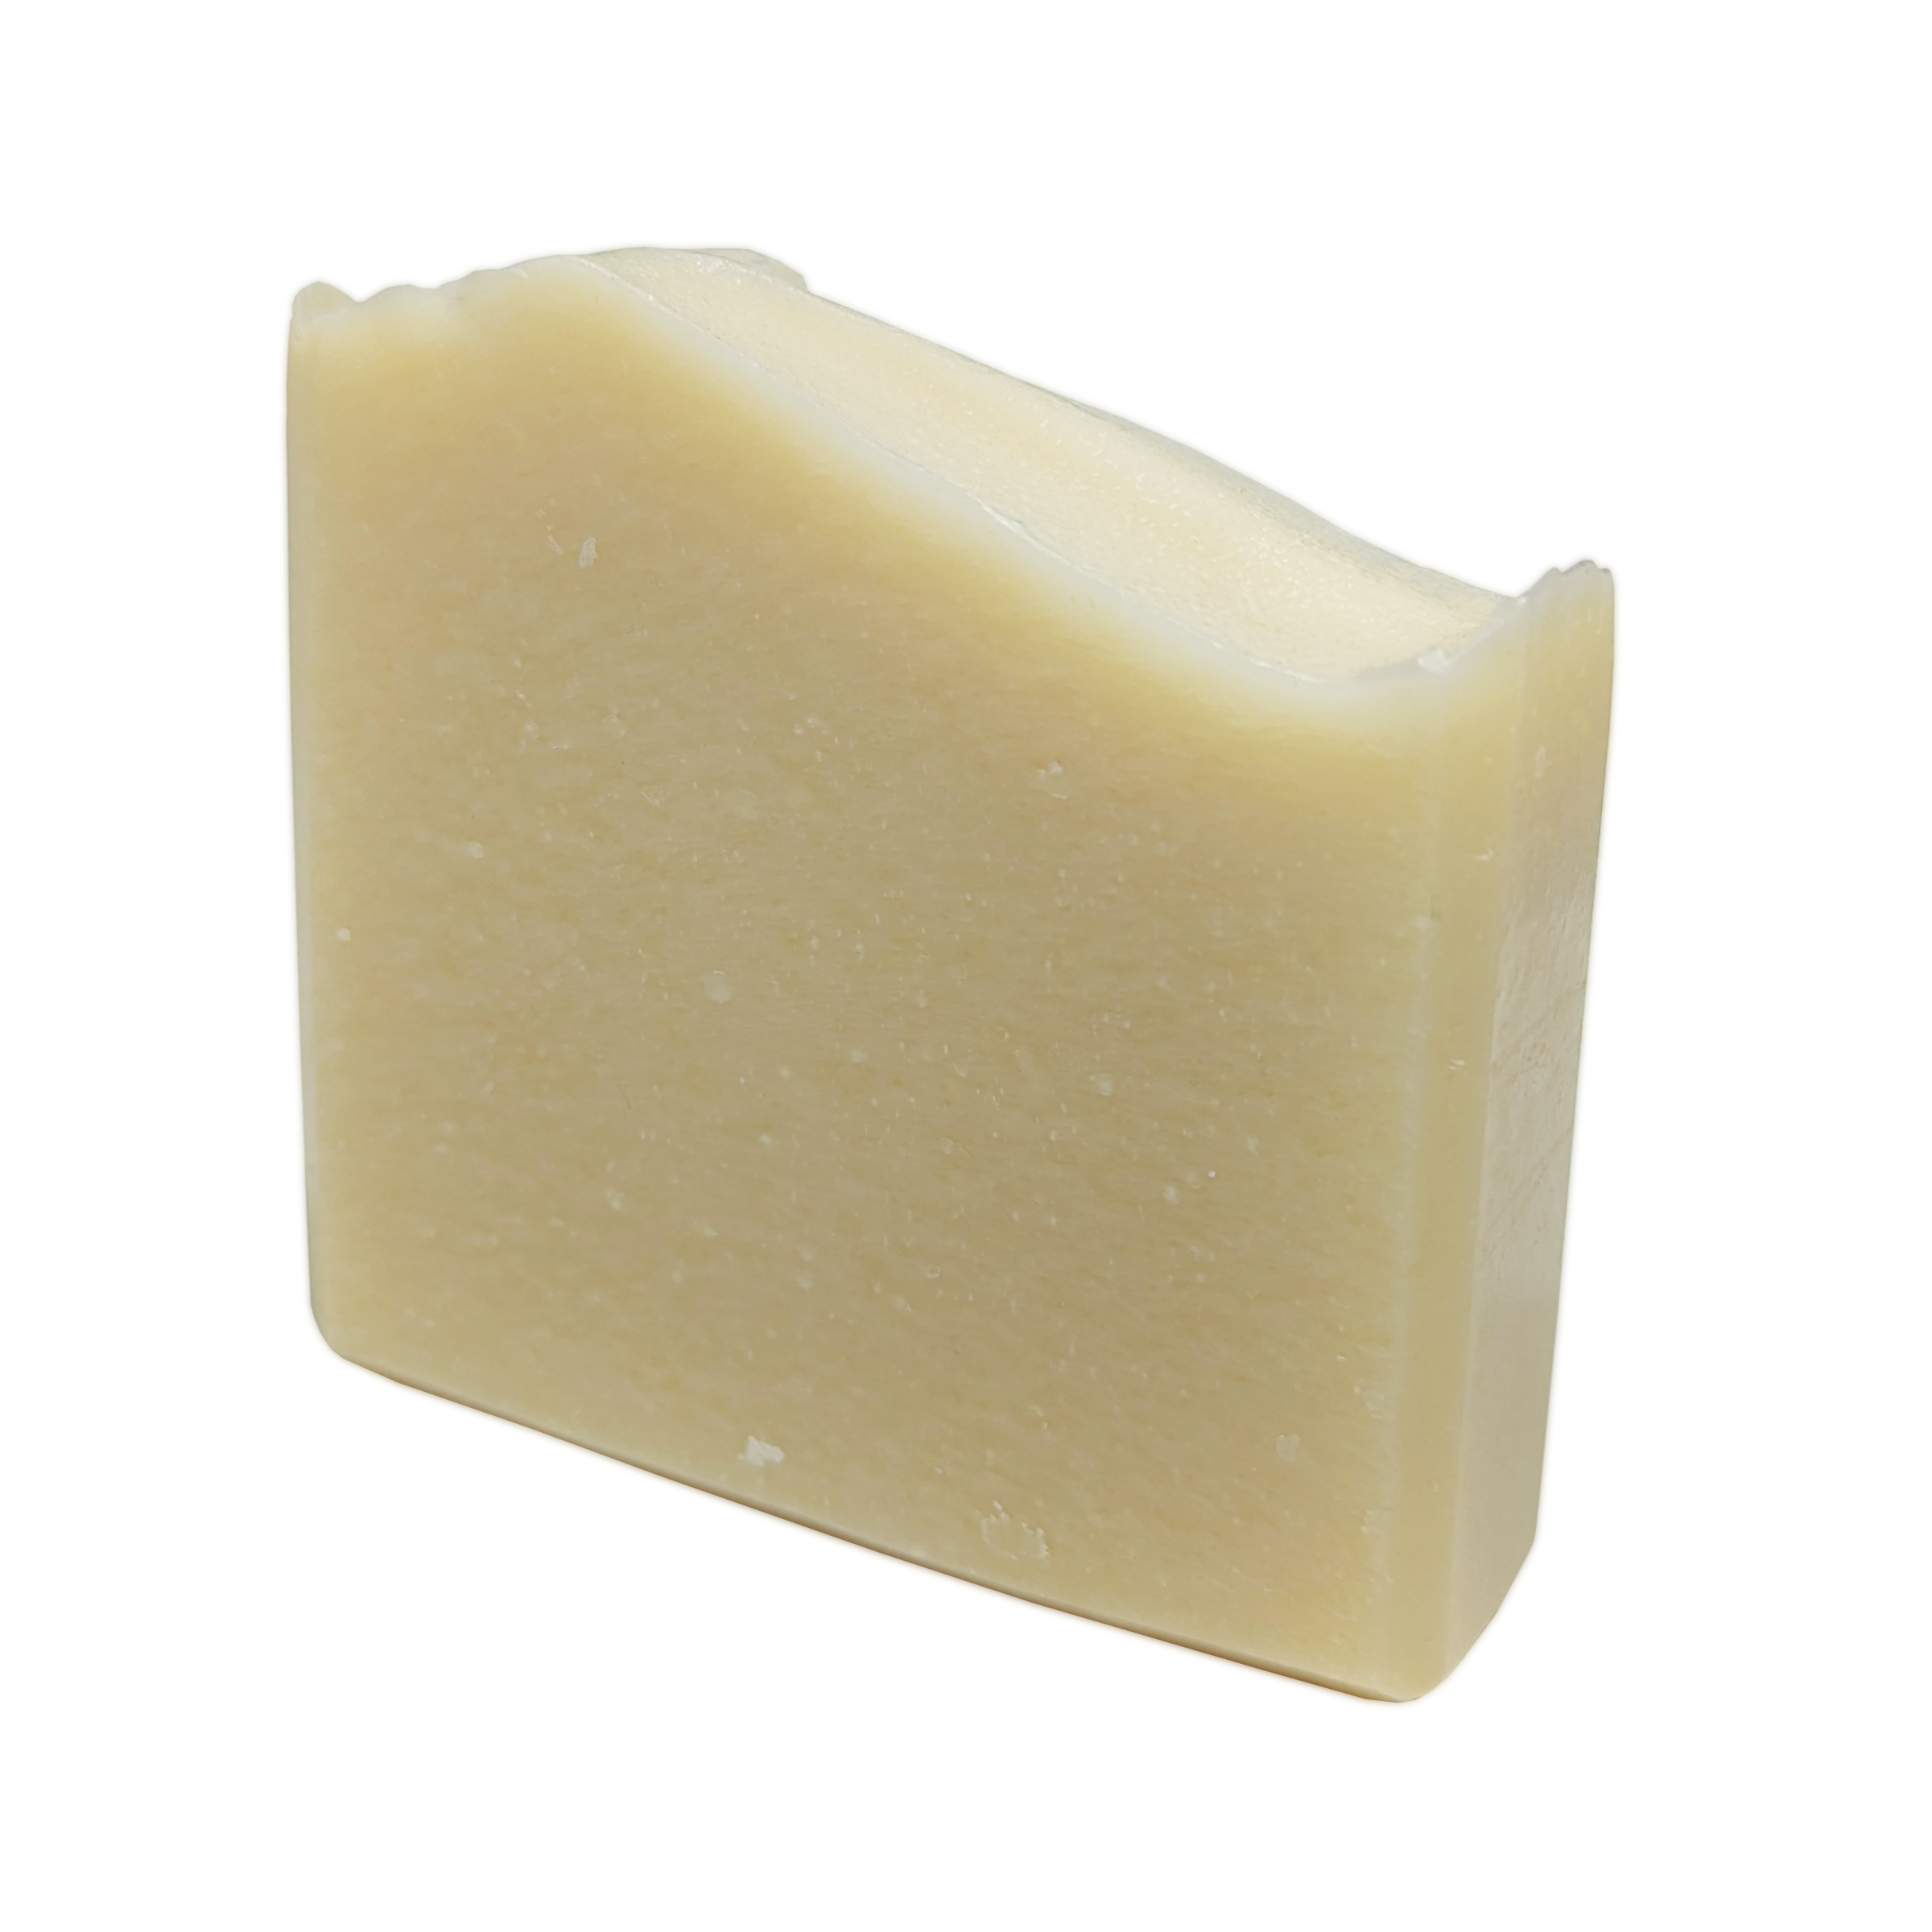 Goat's Milk Unscented Face & Body Soap